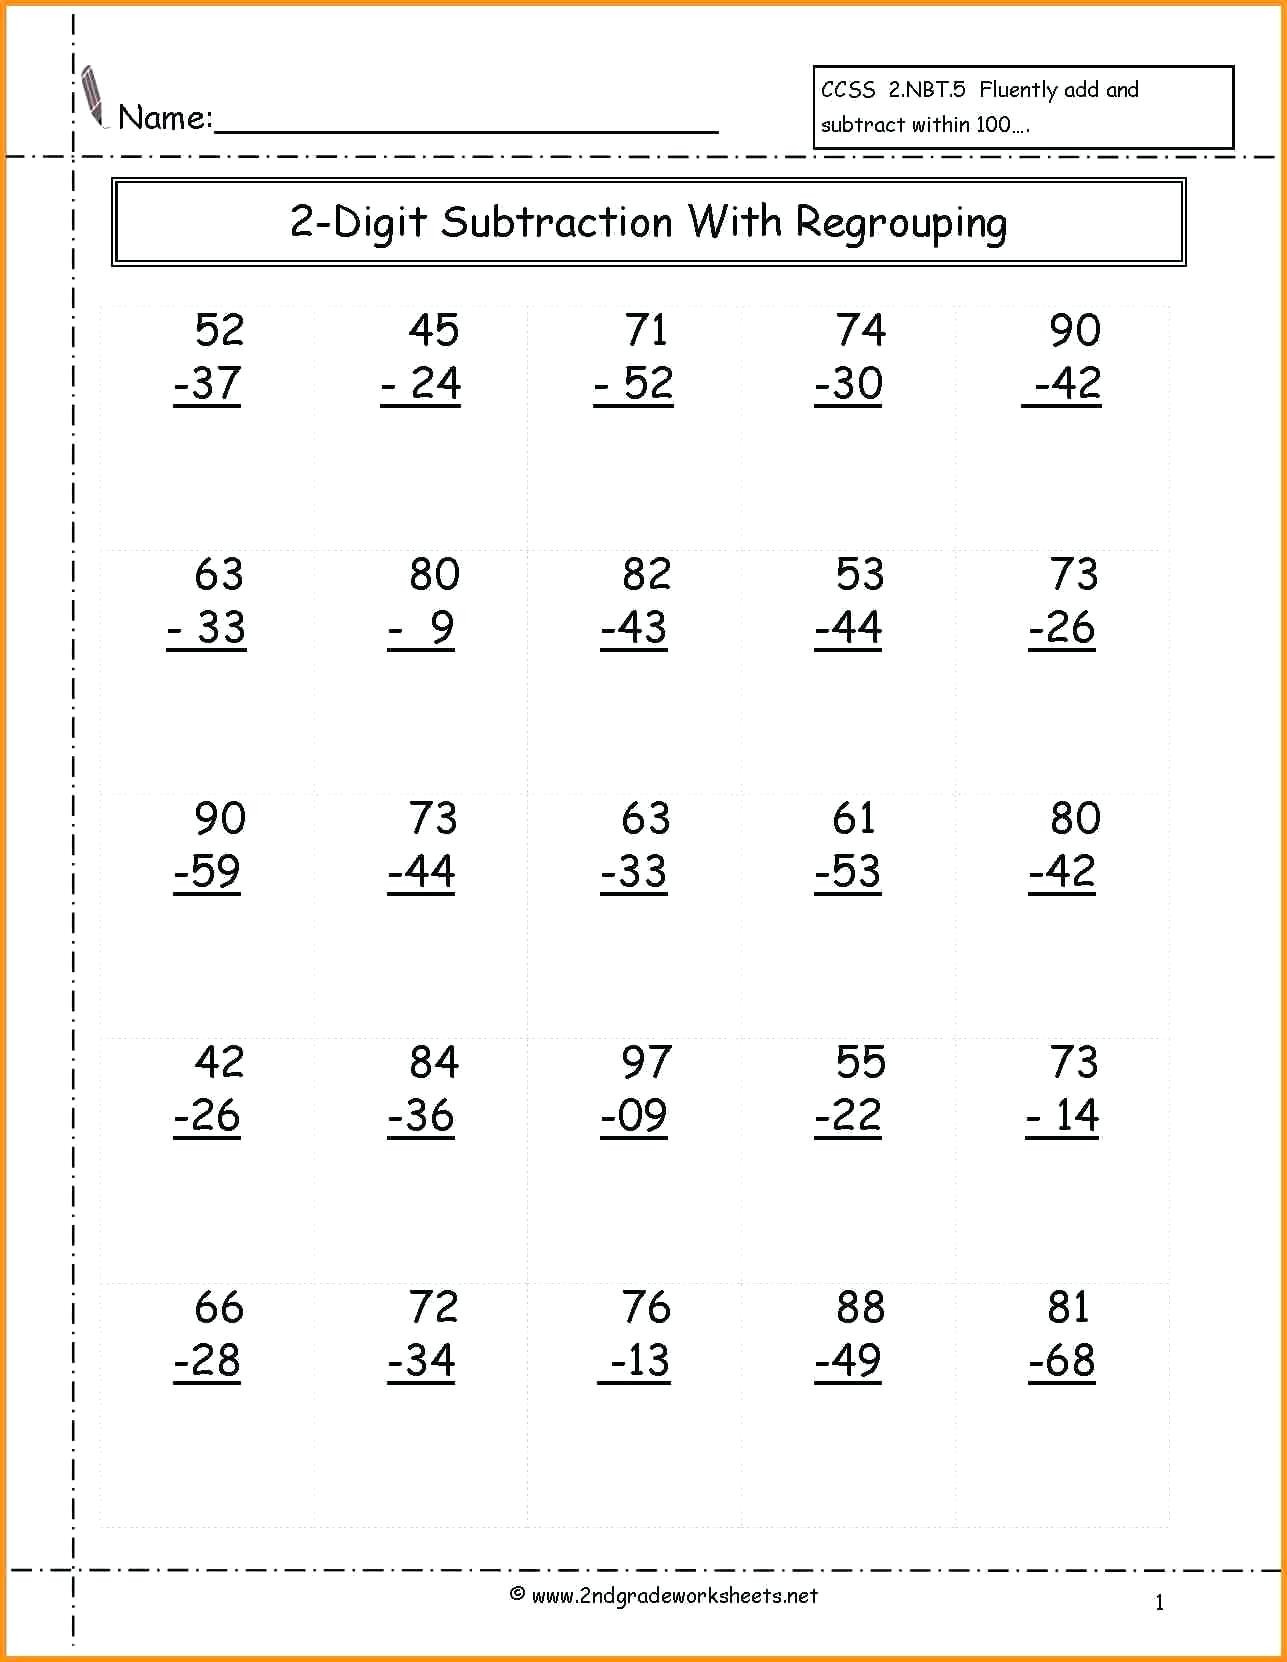 4 Free Math Worksheets First Grade 1 Subtraction Subtract 1 Digit From